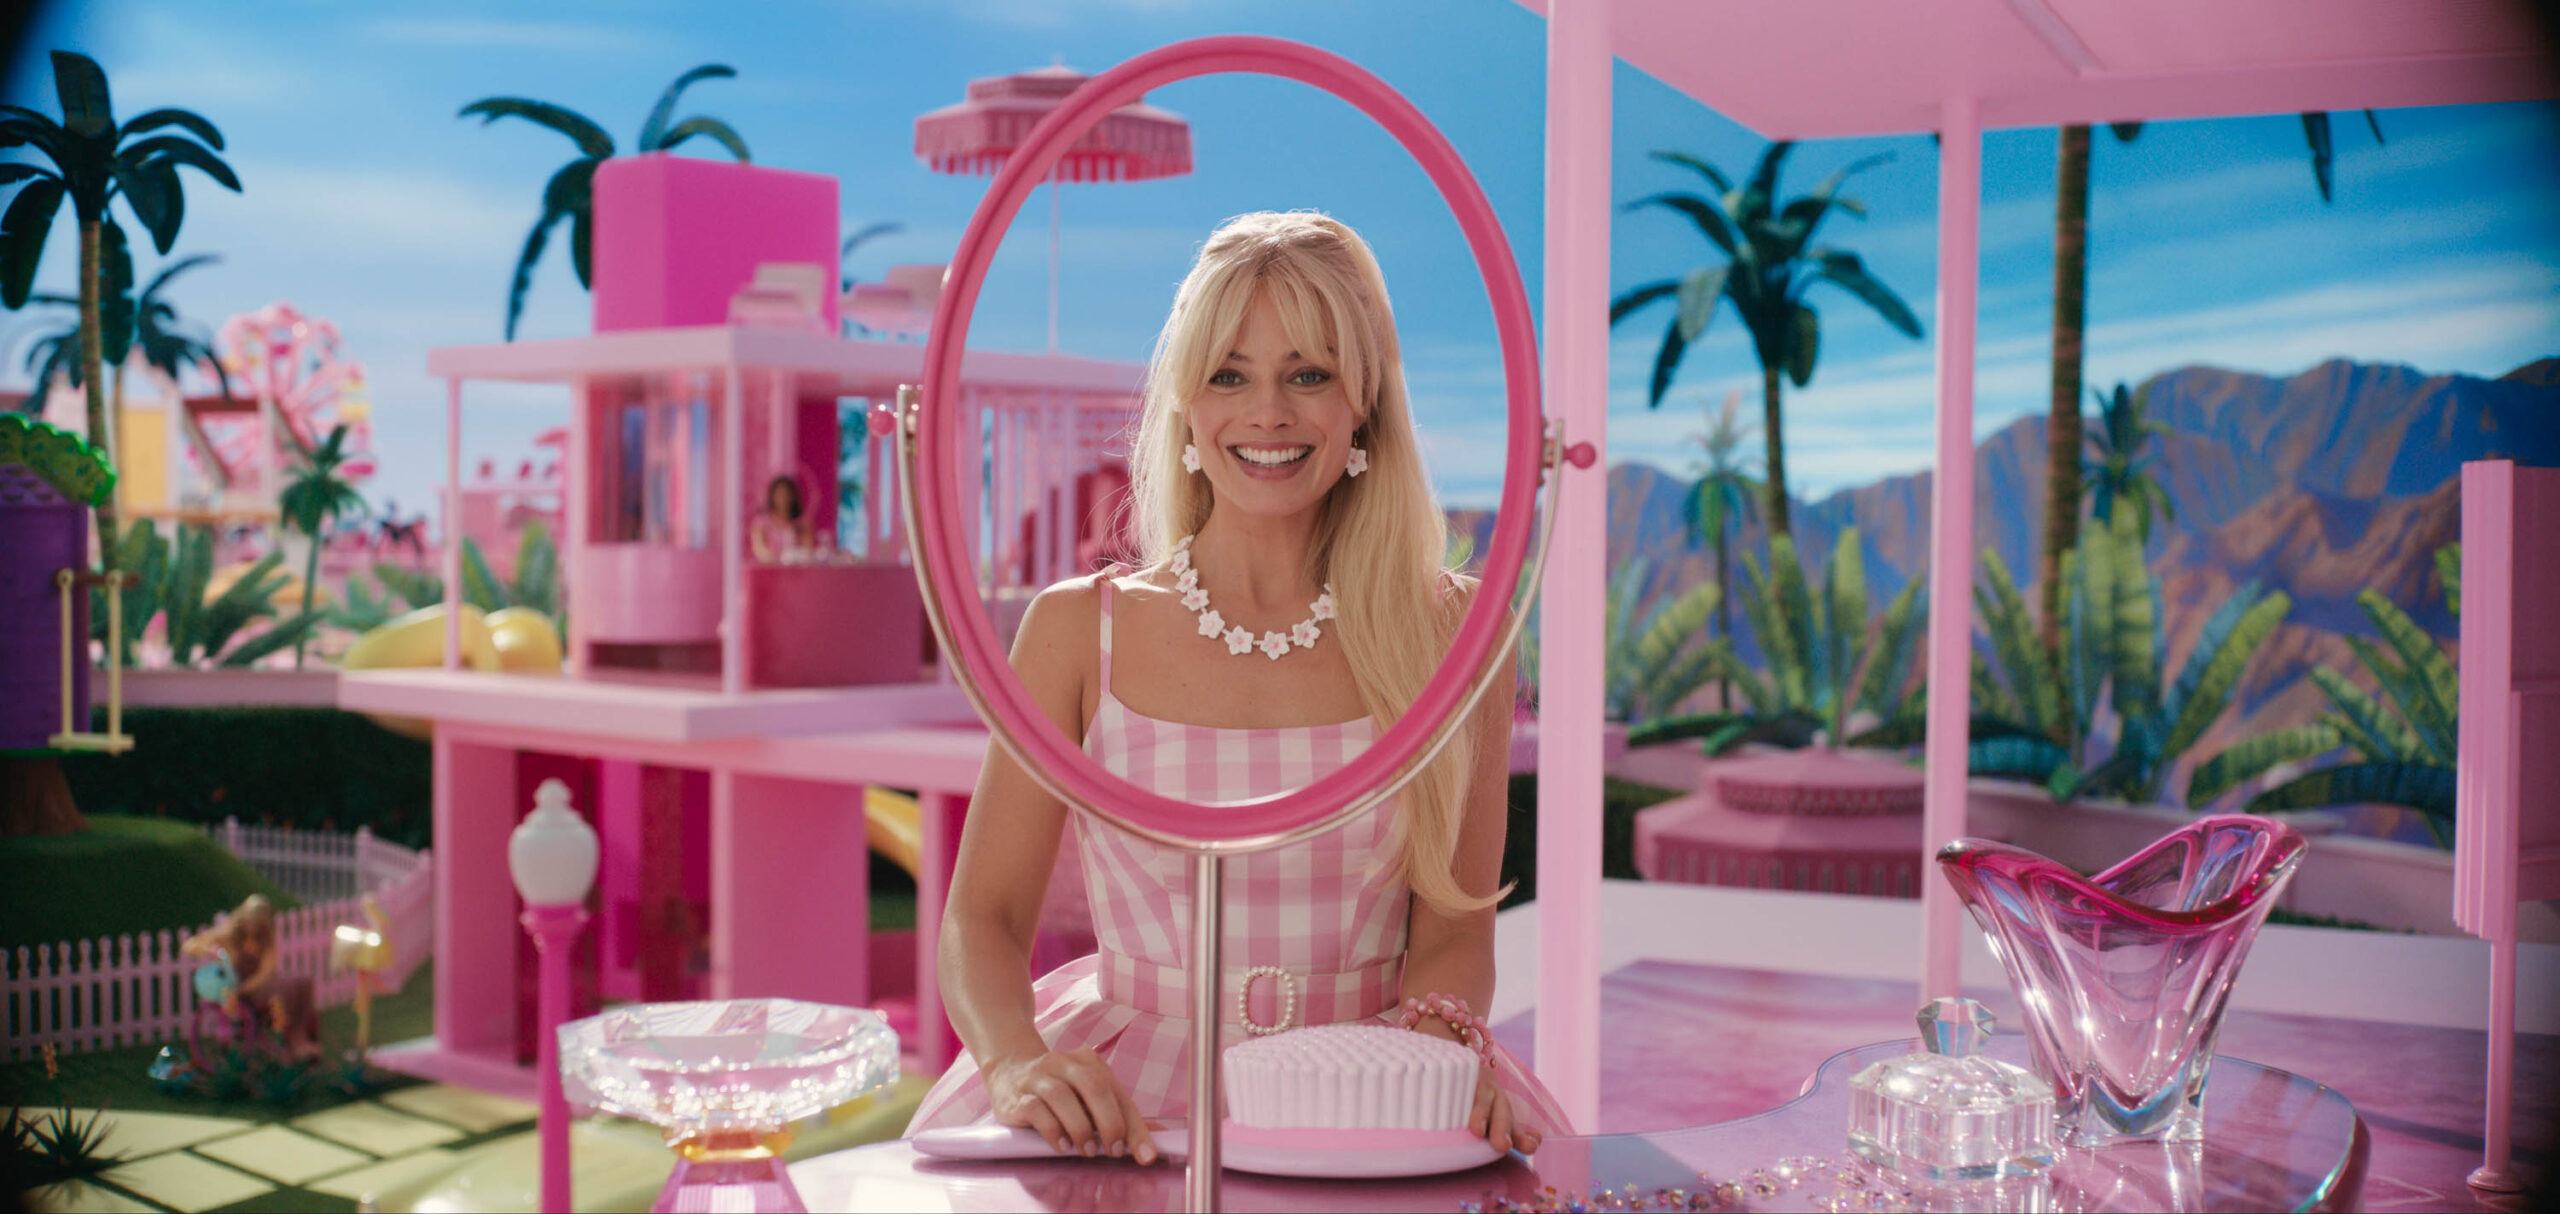 Margot Robbie come Barbie in Barbie [credit: Copyright 2023 Warner Bros. Entertainment Inc. All Rights Reserved; courtesy Warner Bros. Pictures]